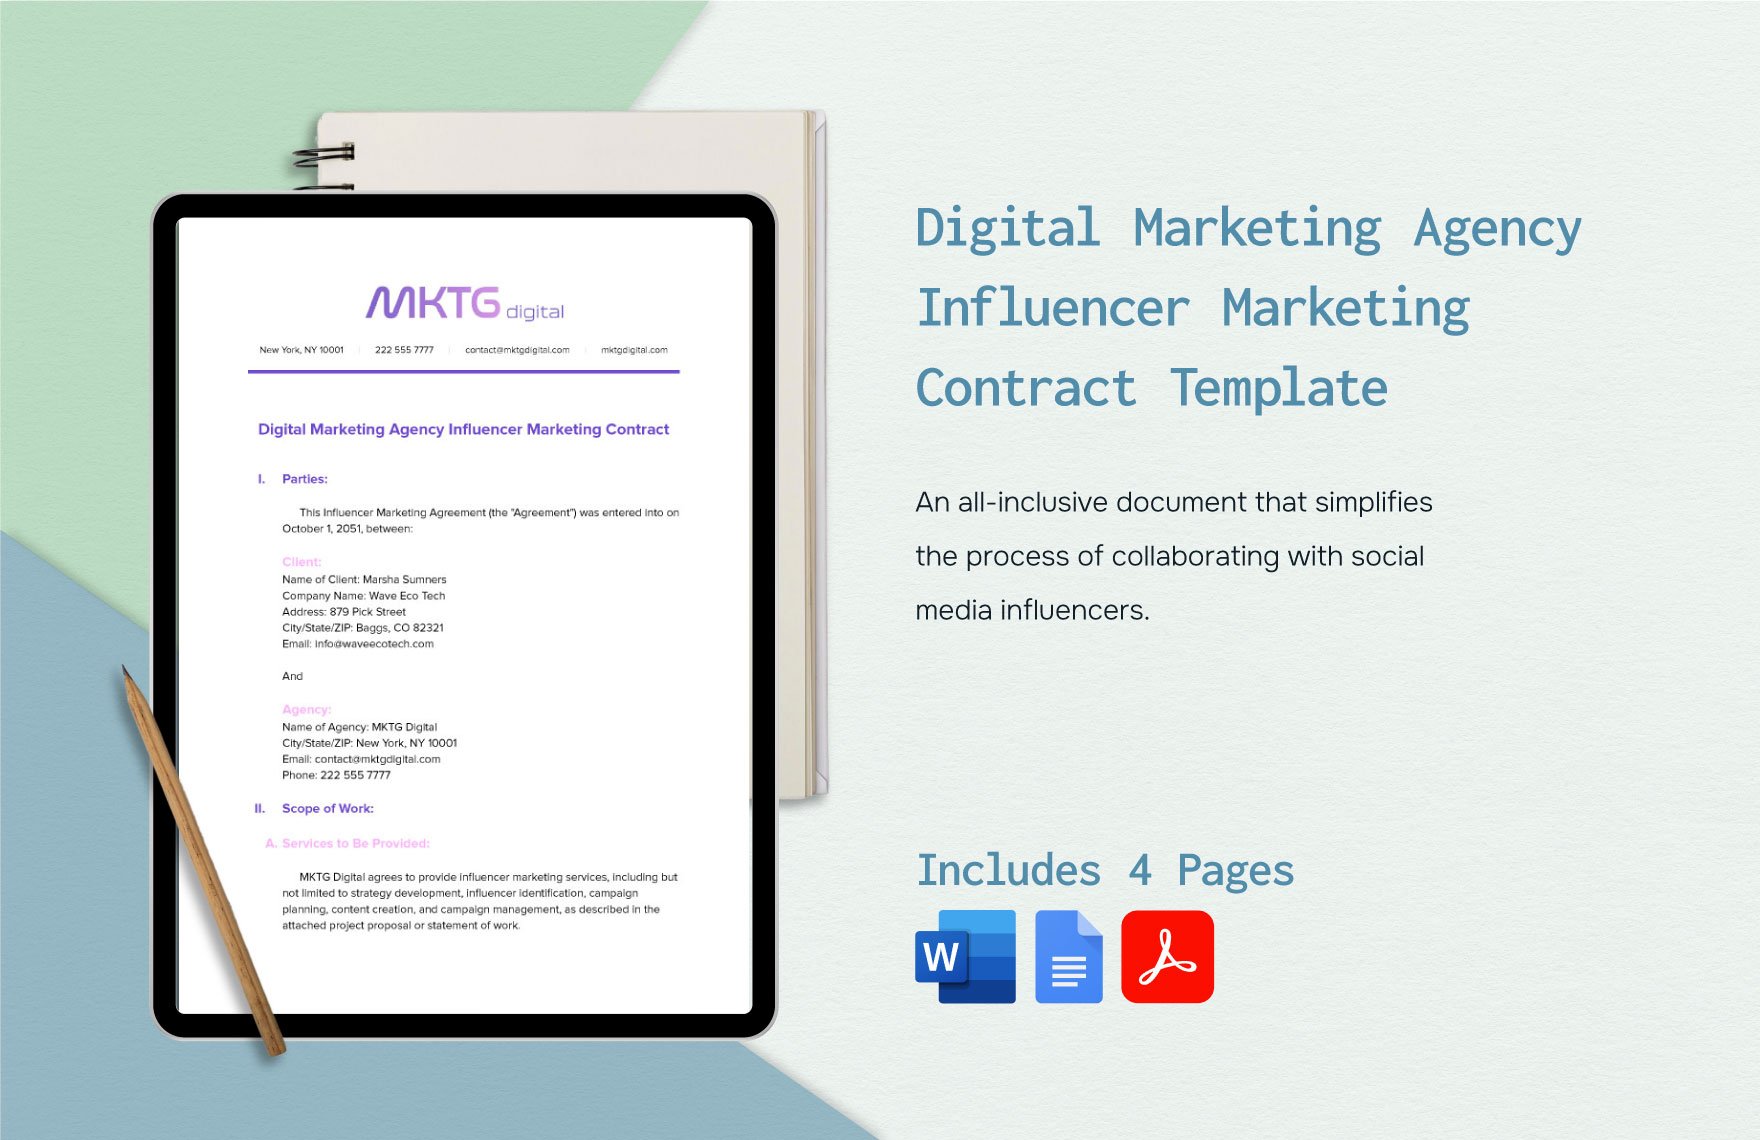 Digital Marketing Agency Influencer Marketing Contract Template